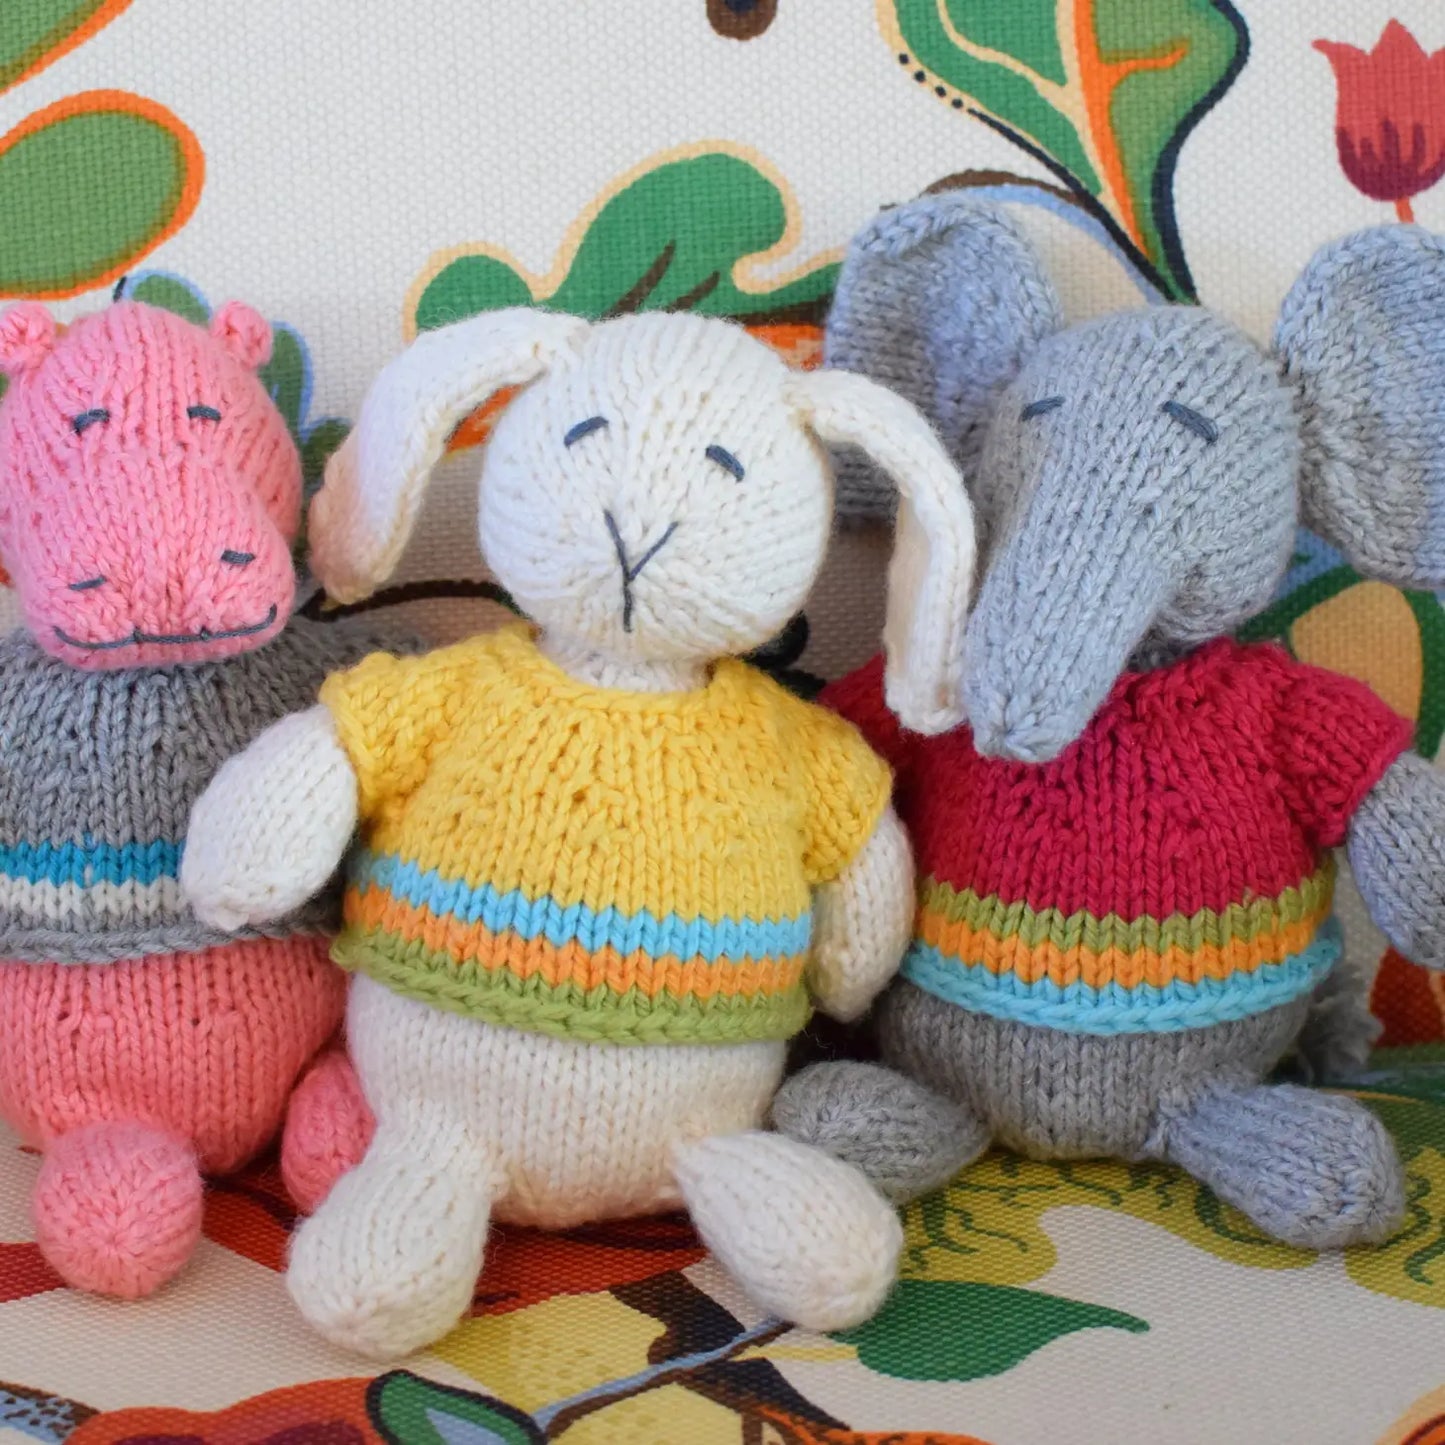 "Wee Ones" Knitting Pattern